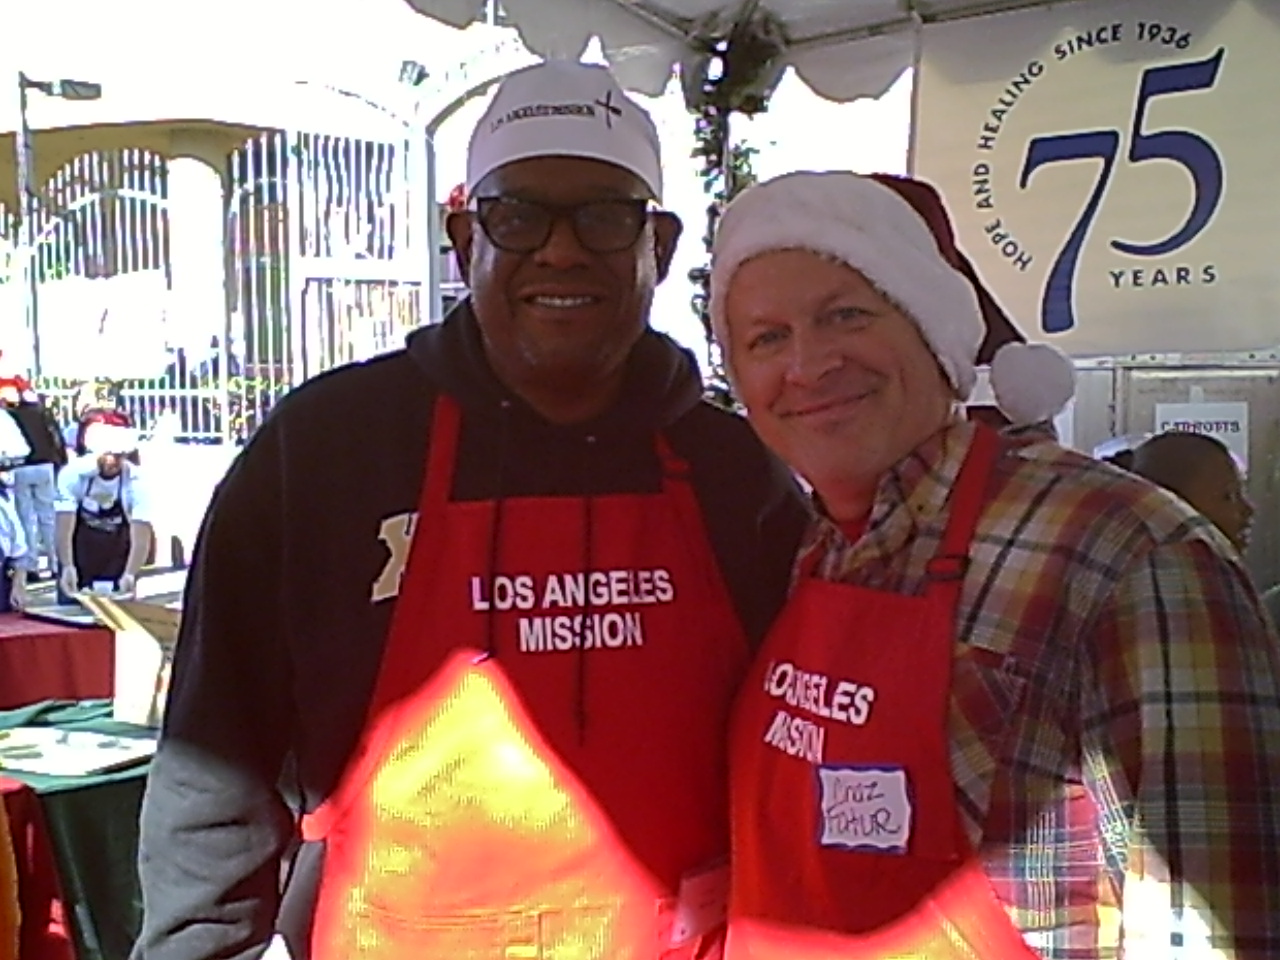 Myself & Forest Whitaker at a L.A. Mission X-Mas event.